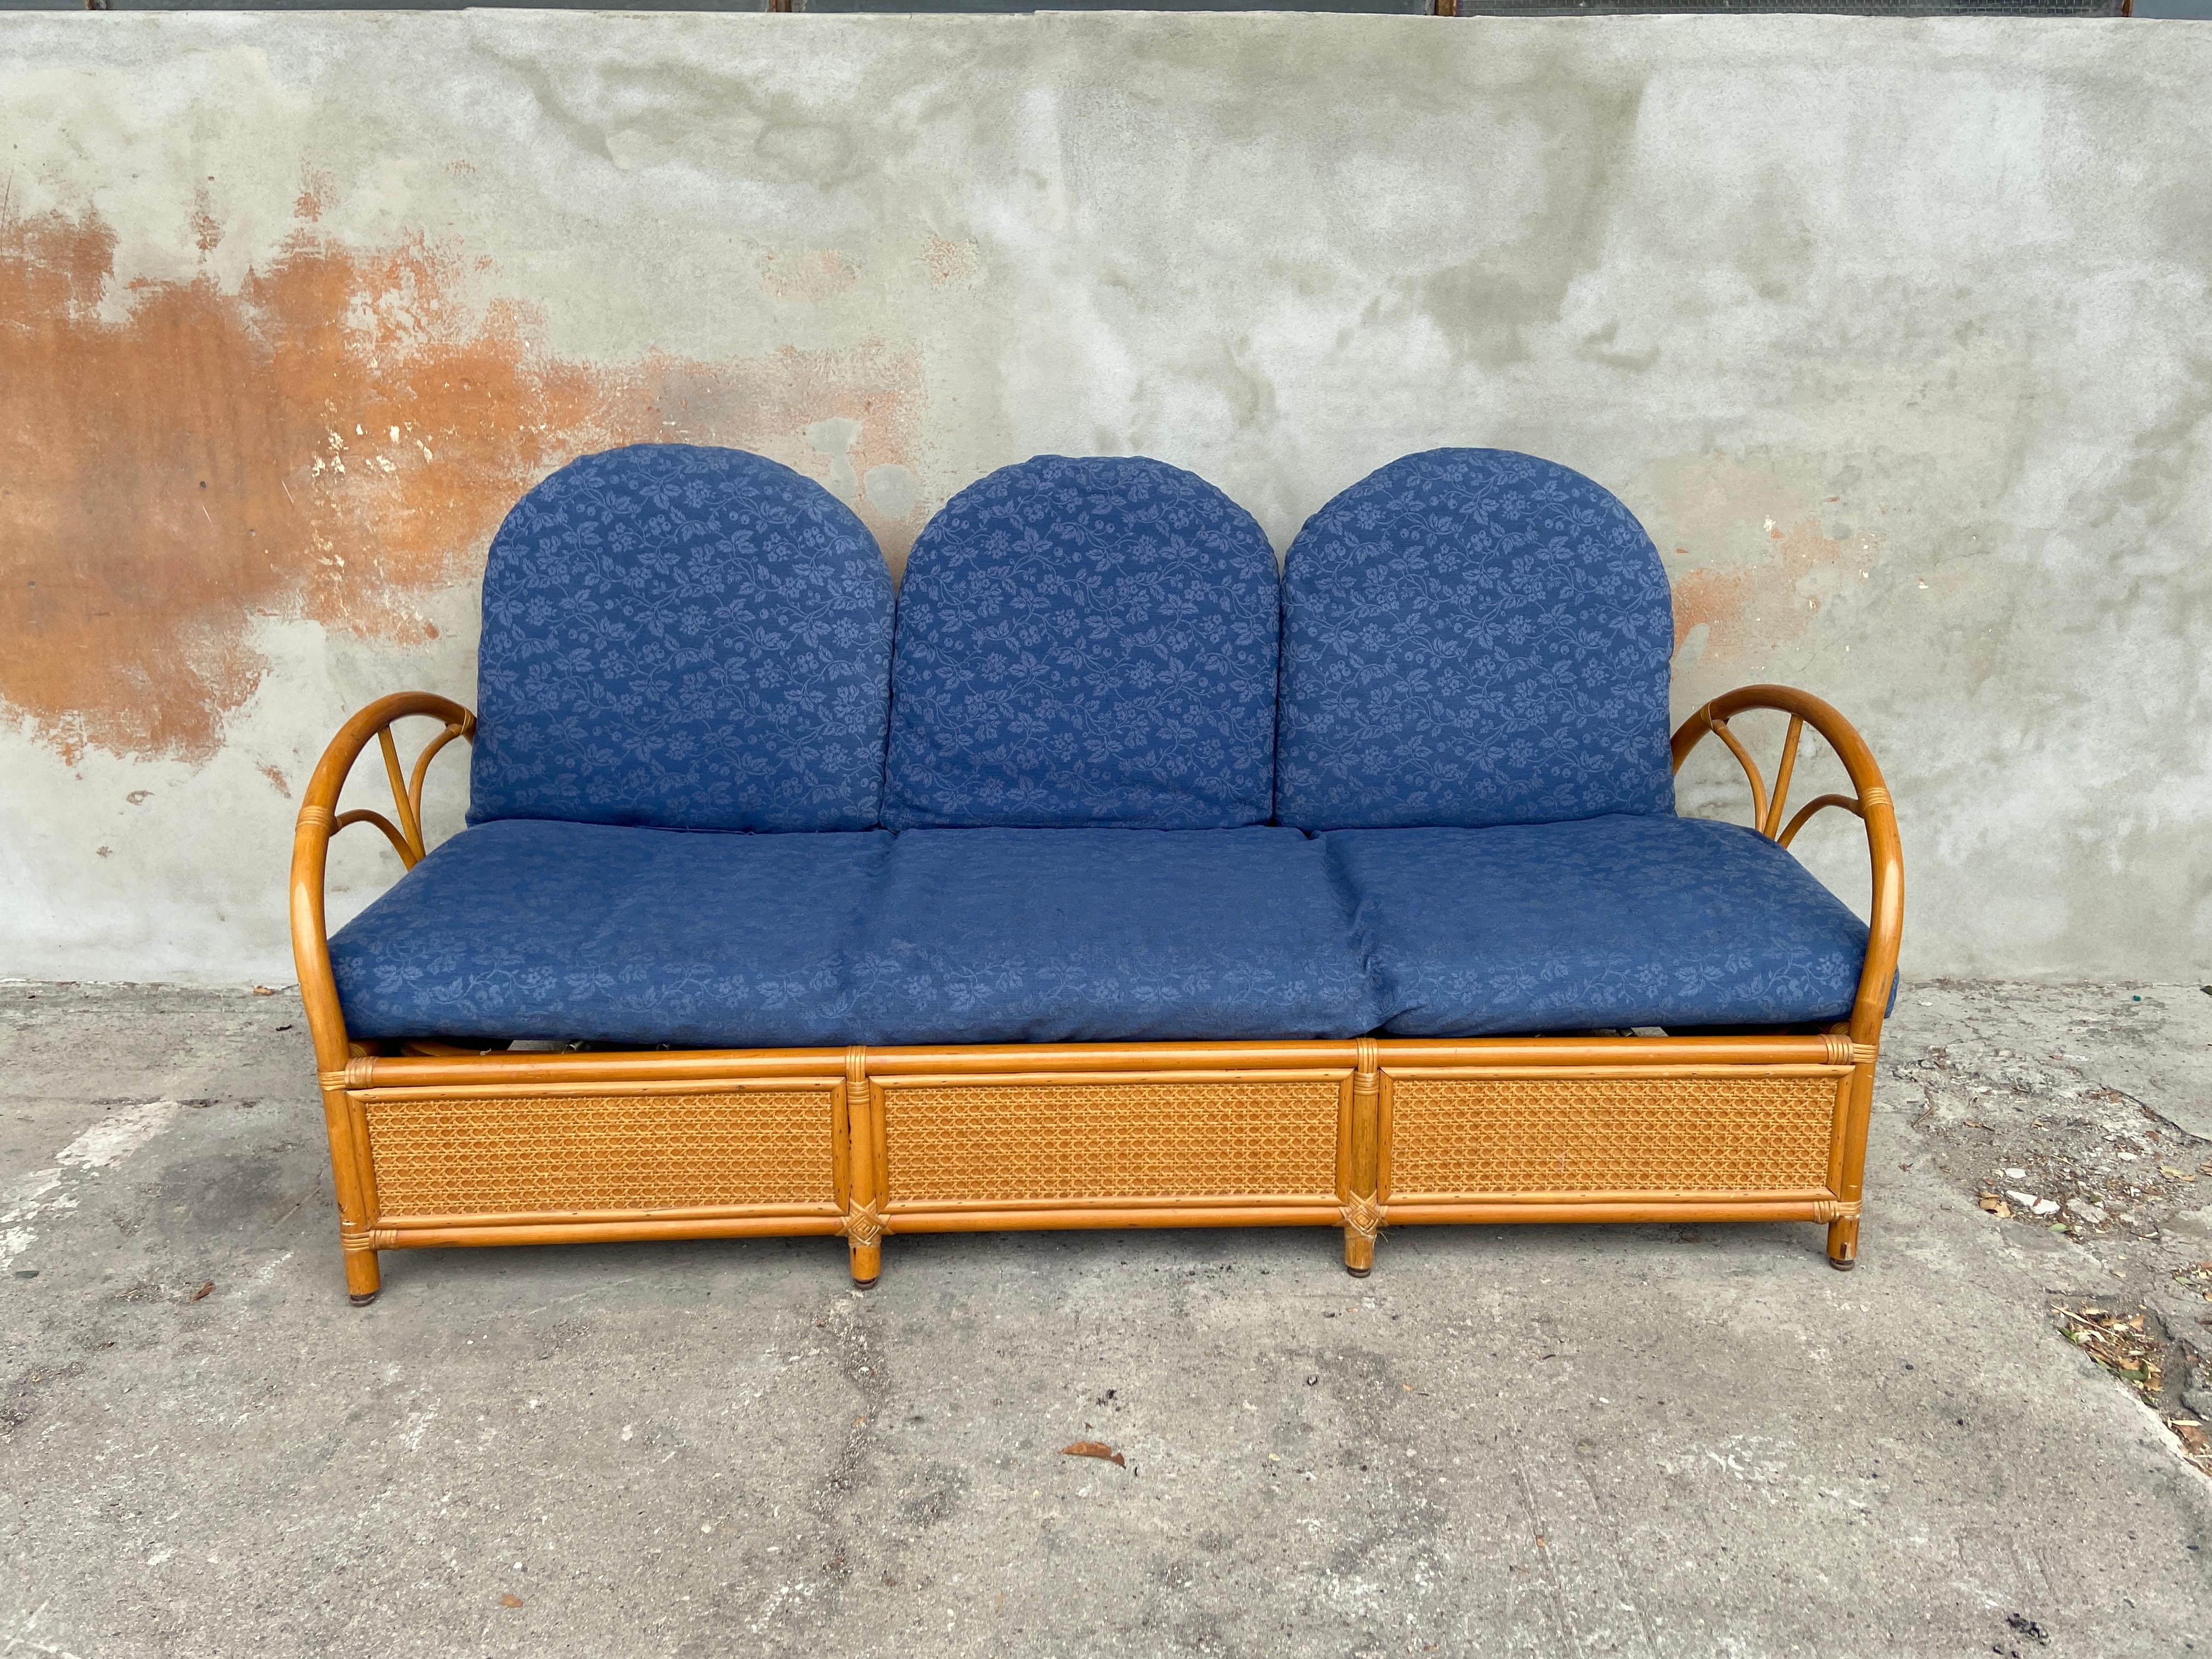 Mid-Century Modern Italian bamboo and rattan sofa with original blue fabric cushions.
The basement of the sofa has a beautiful decoration made with framed 